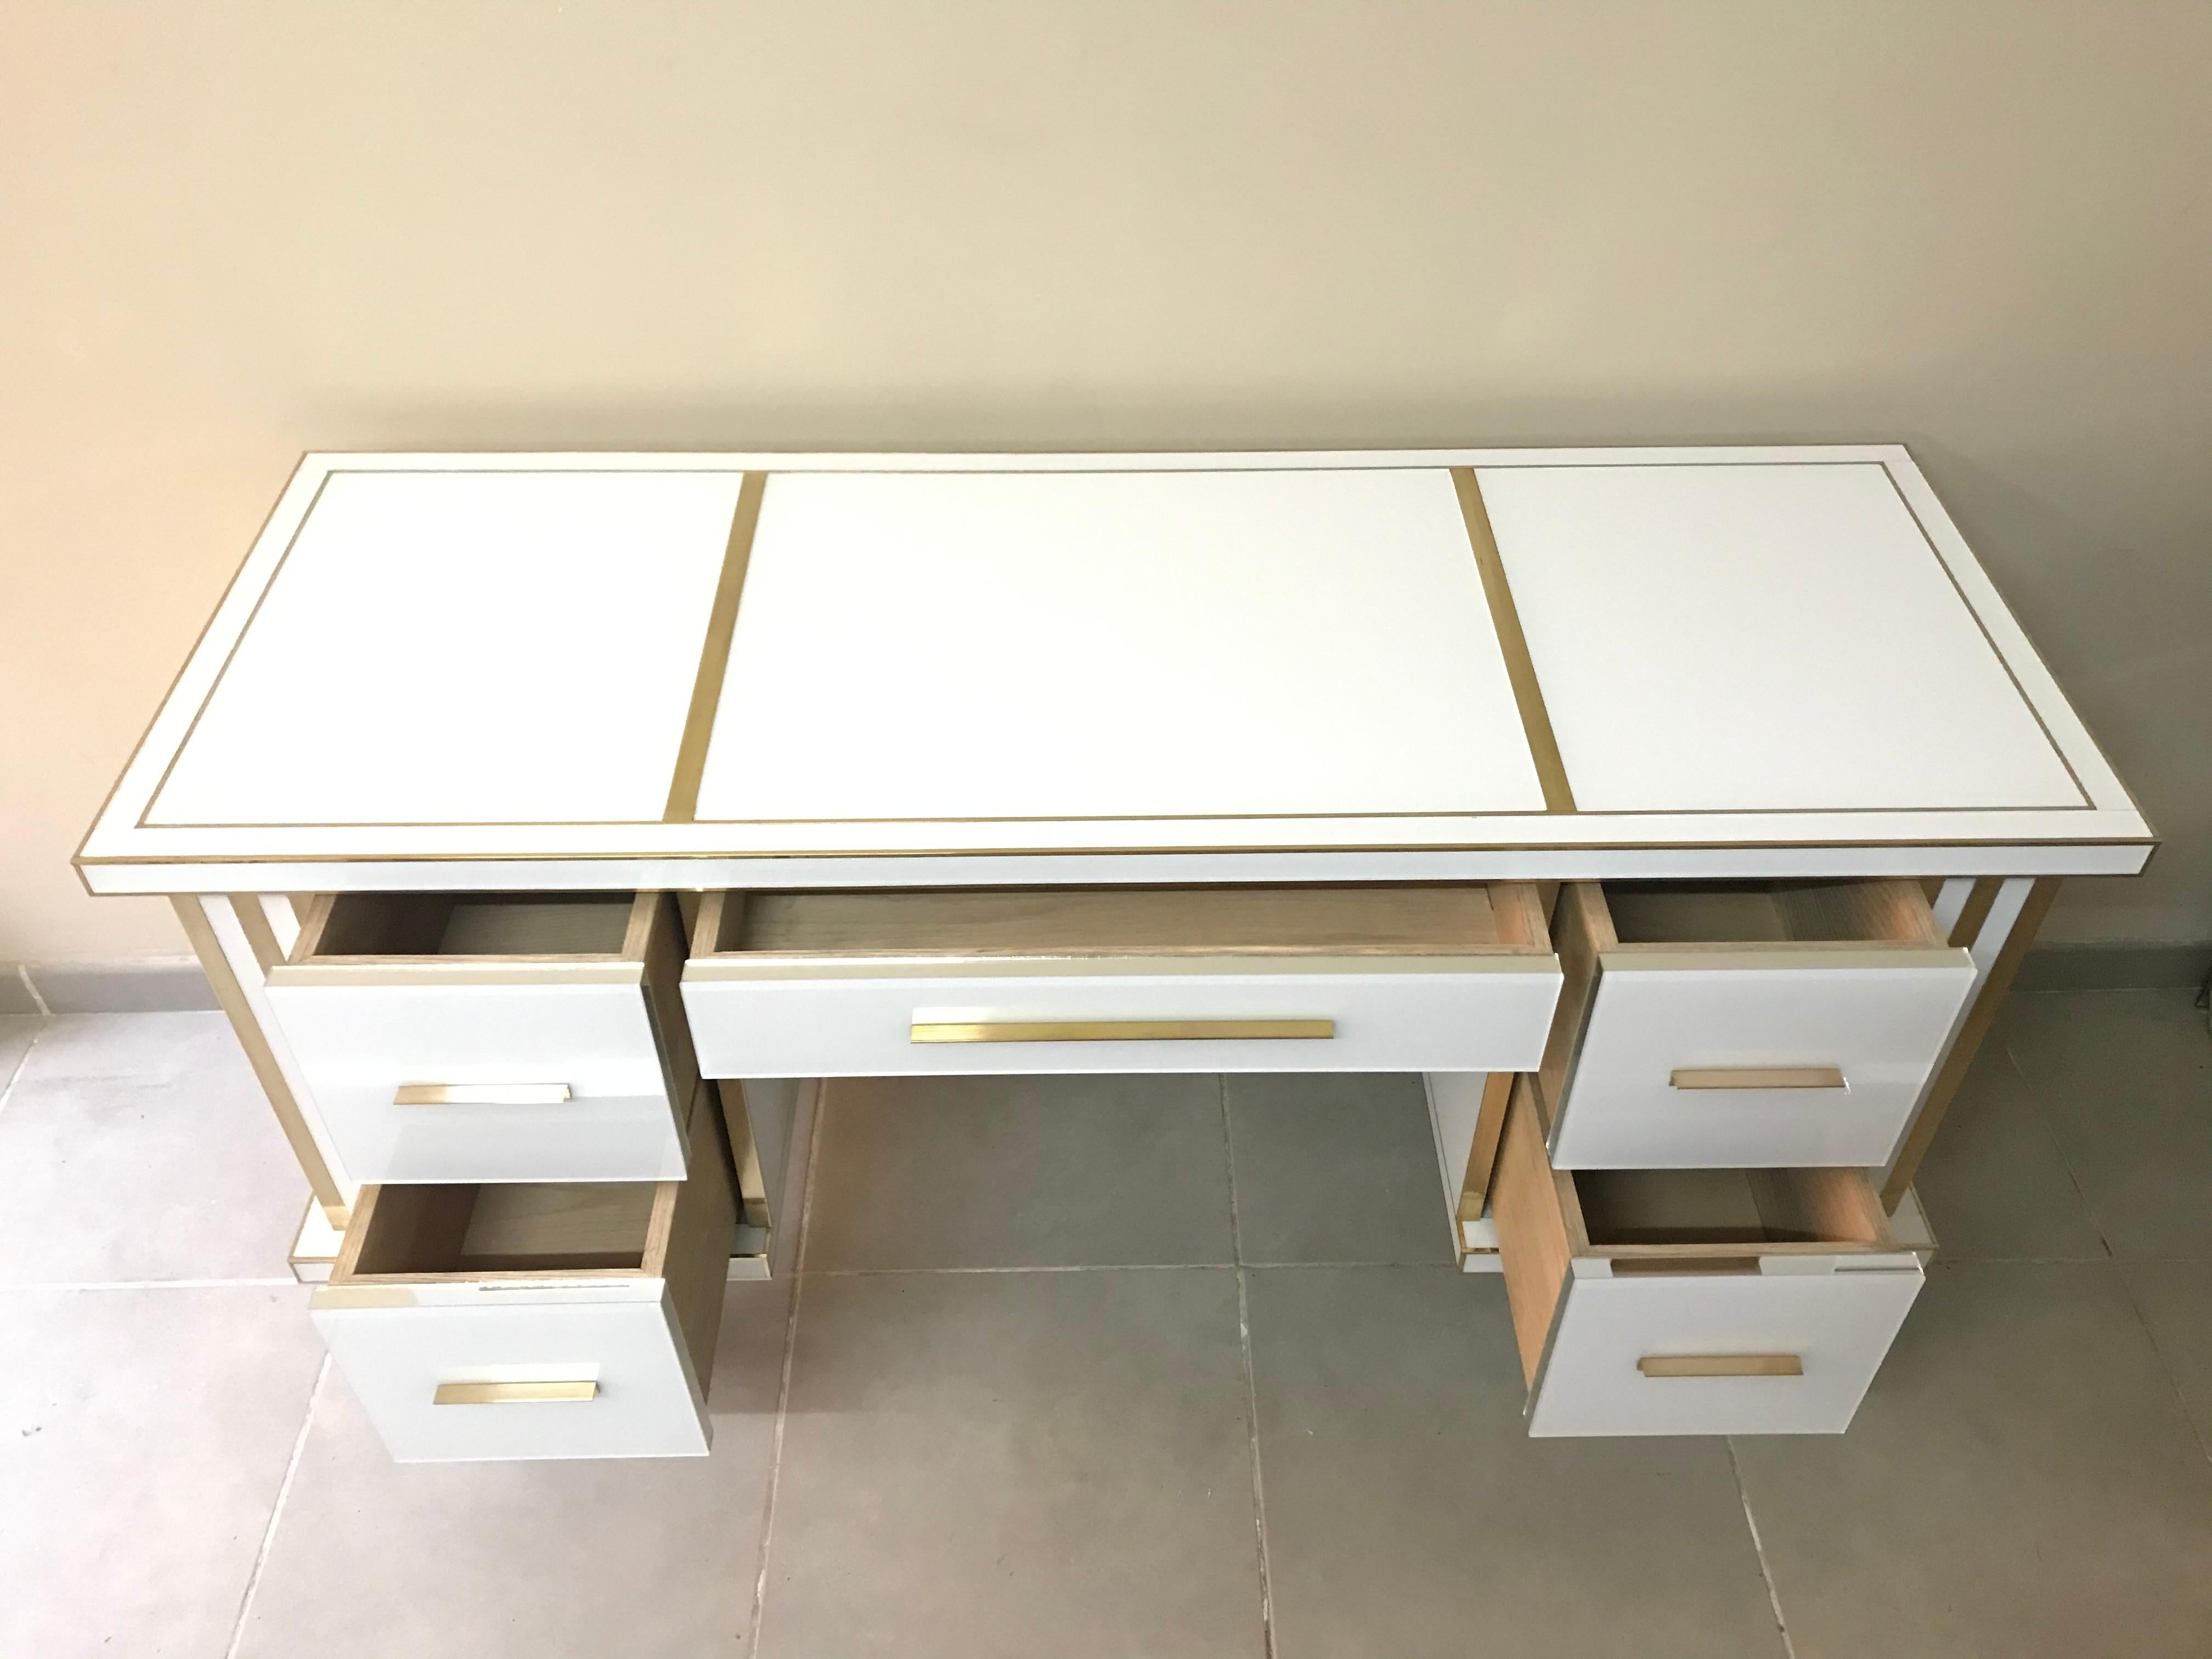 Lovely white mirror desk or vanity table
A statement of elegance and quality
Single piece of the collection
Mirrored, 21st century

Measures: Height from the floor to the central drawer: 23.62 in.